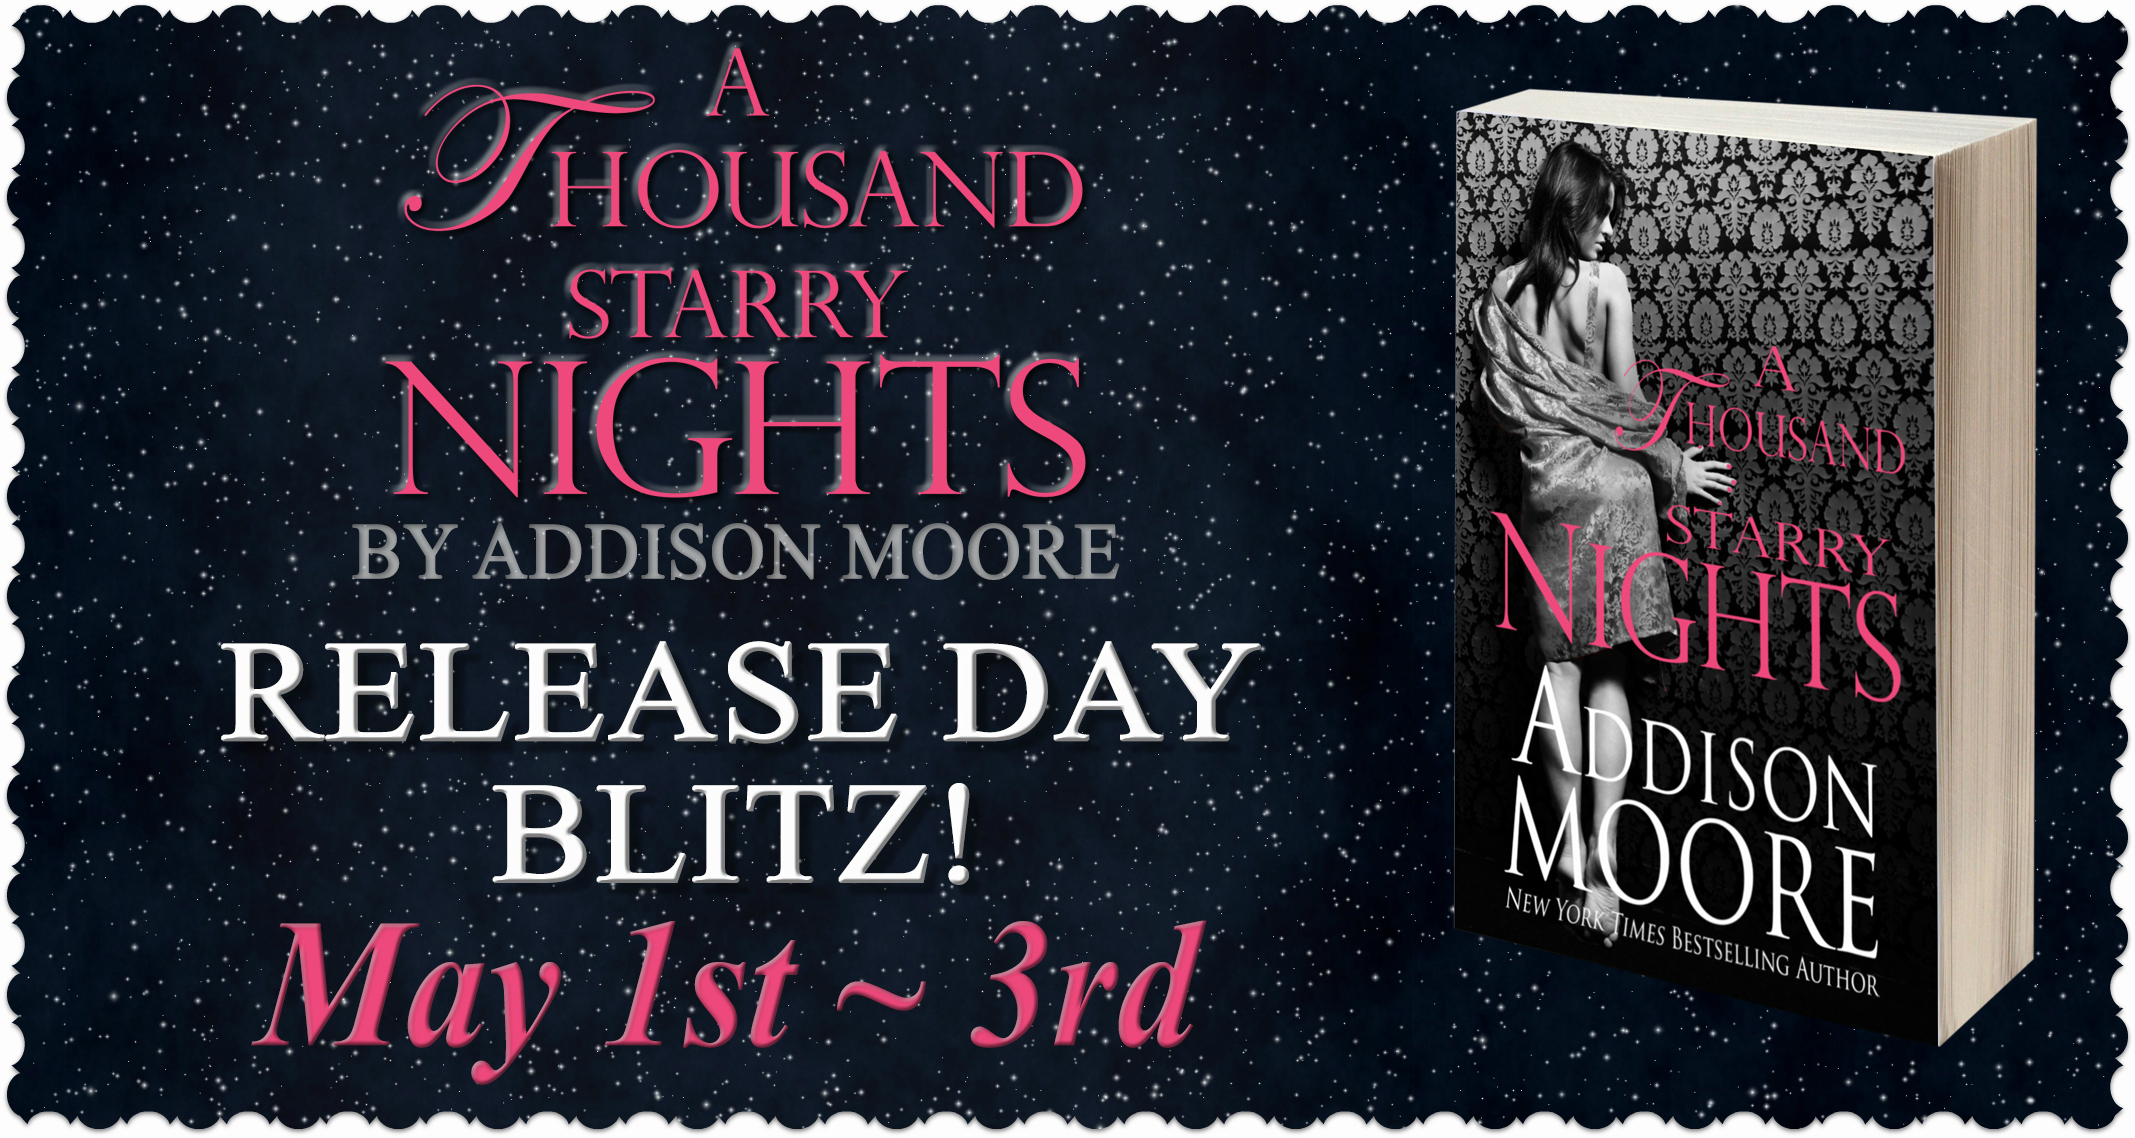 A Thousand Starry Nights by Addison Moore Release Day